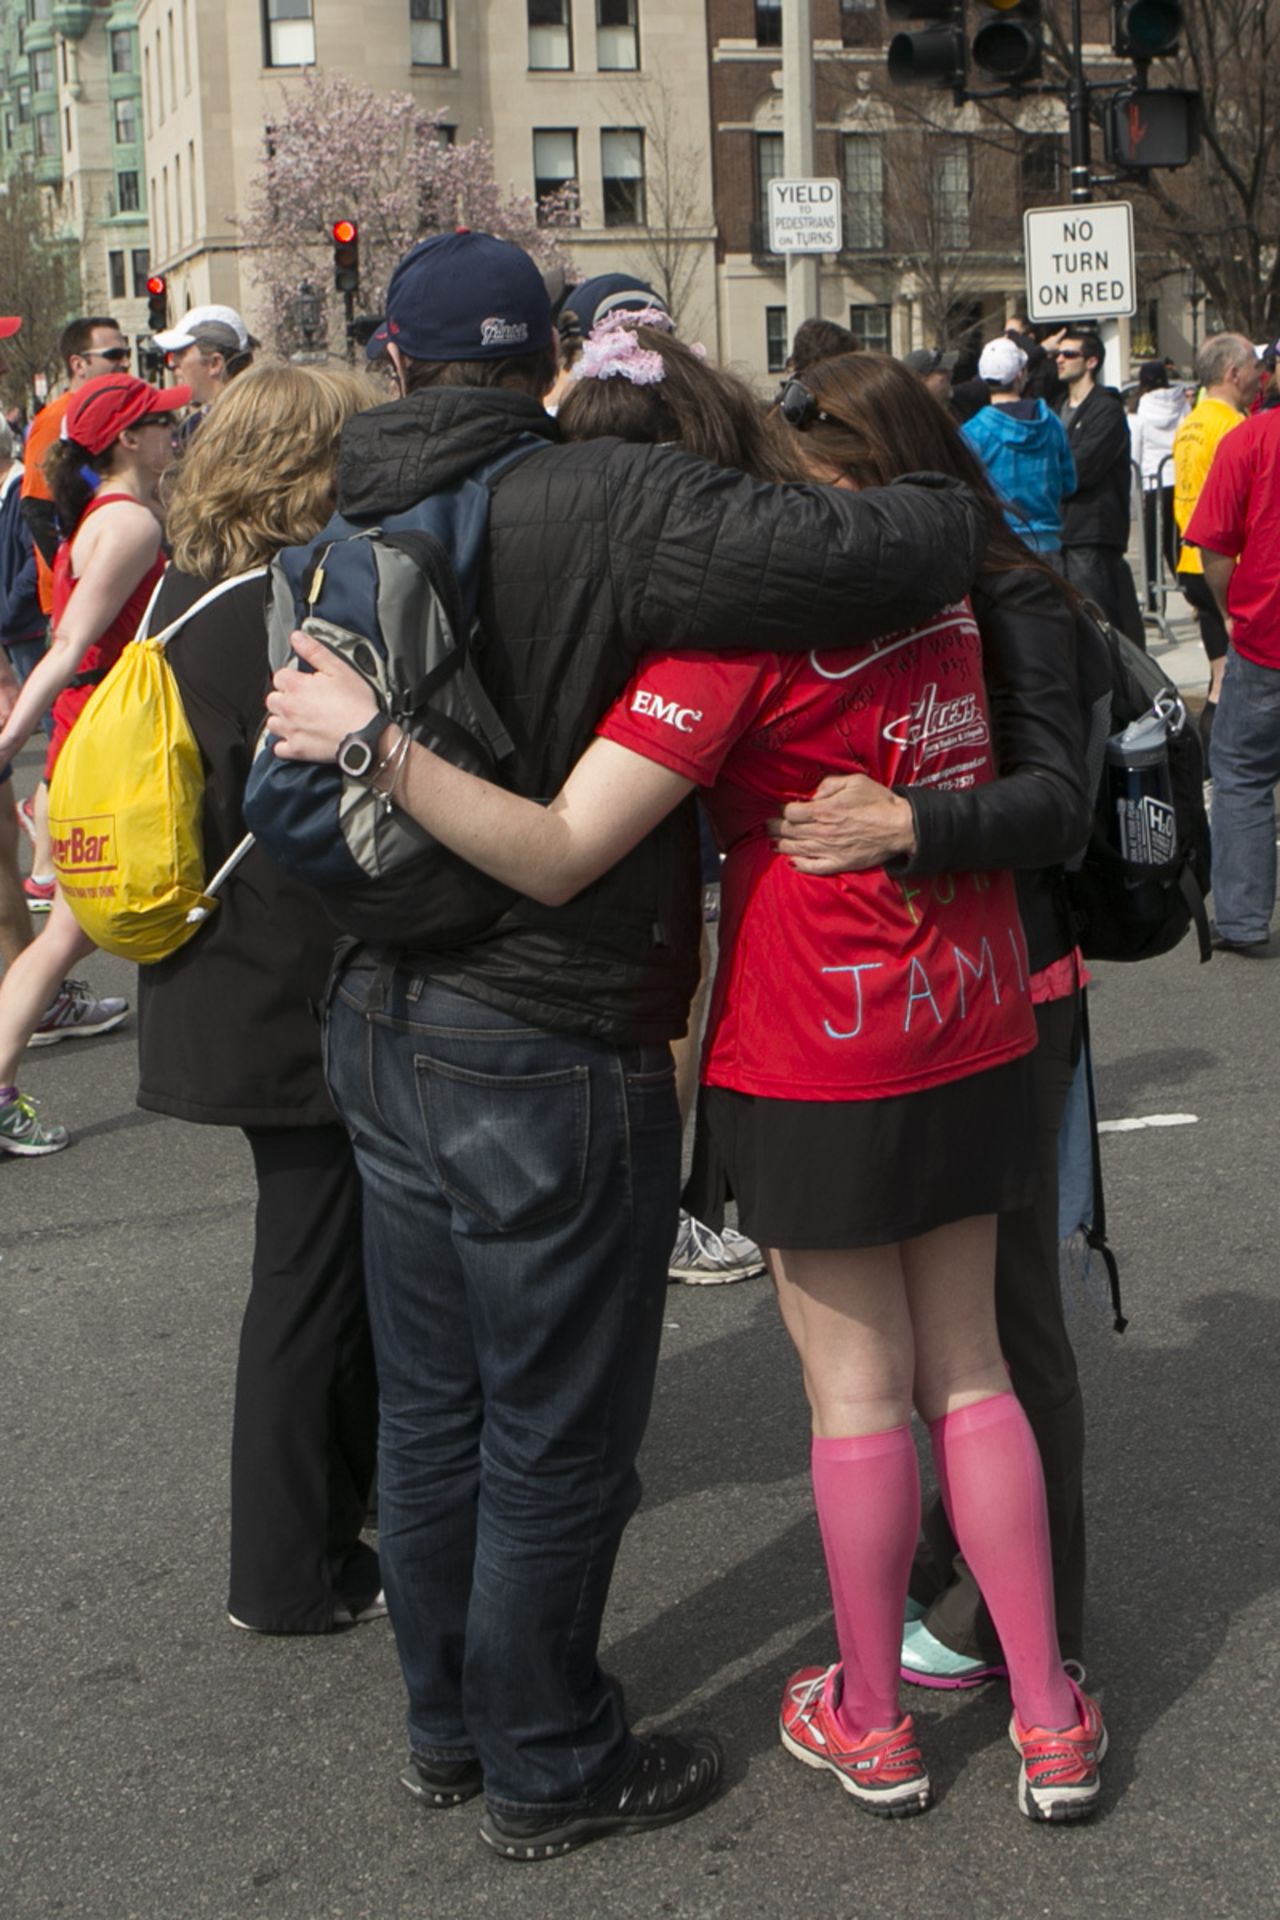 <a href="http://ireport.cnn.com/docs/DOC-957434">Andrea Catalano</a>, a freelance photographer, shot this photo about a mile from the Boston Marathon finish line. He wanted to capture the outpouring of support from spectators and people in the area, comforting and assisting runners.